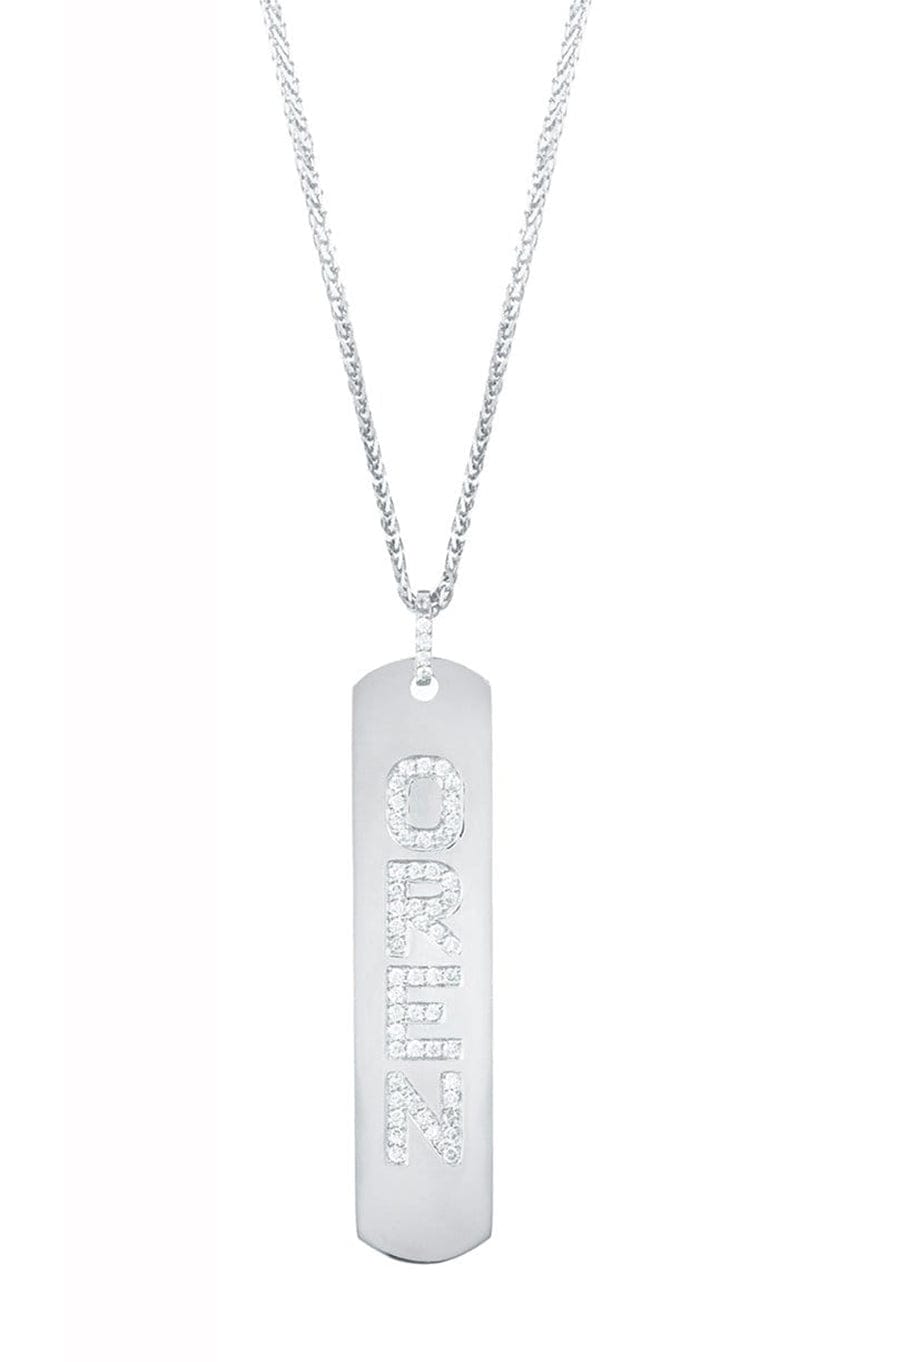 CARBON & HYDE-Longtag Necklace - White Gold-WHITE GOLD